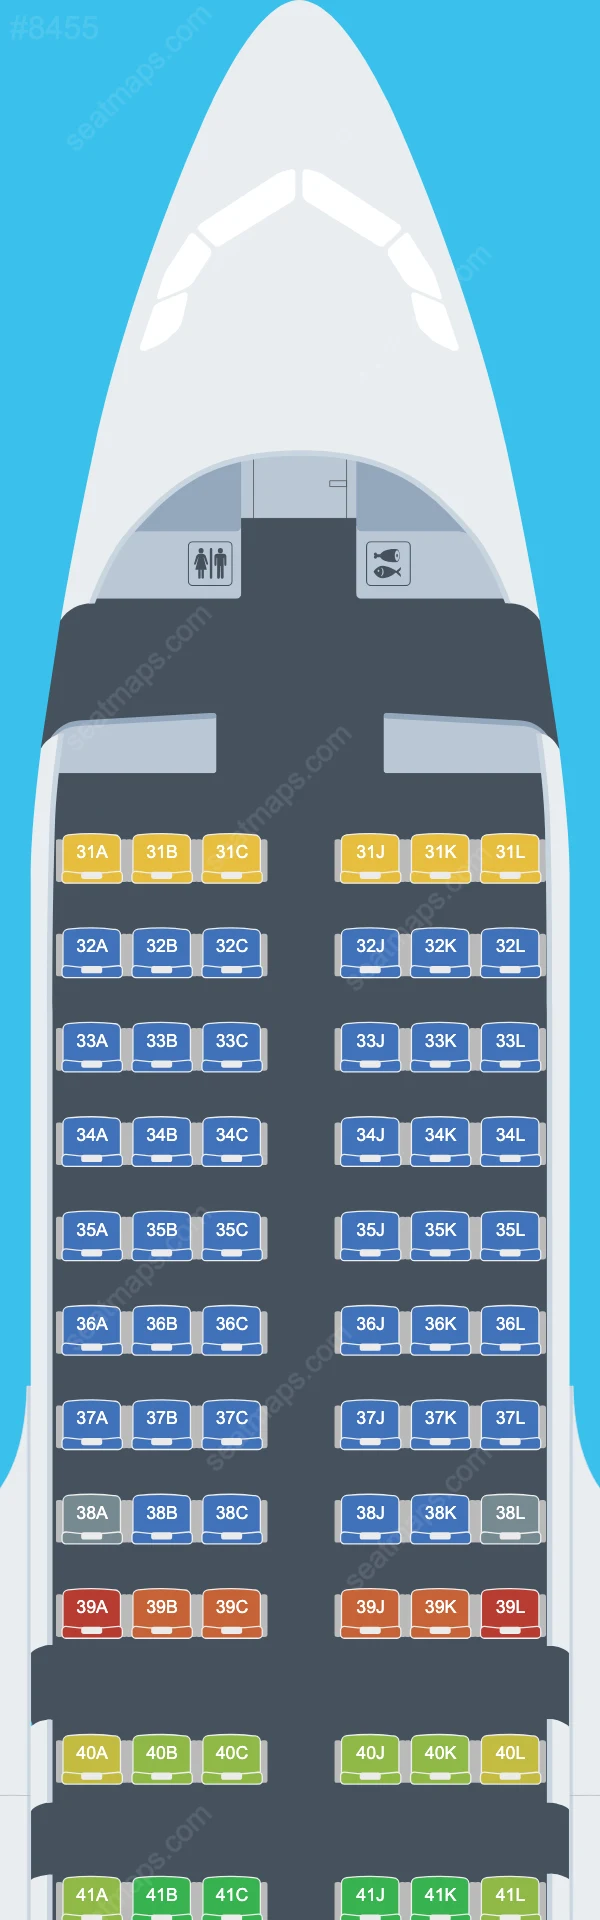 Cambodia Airways Airbus A319-100 seatmap mobile preview